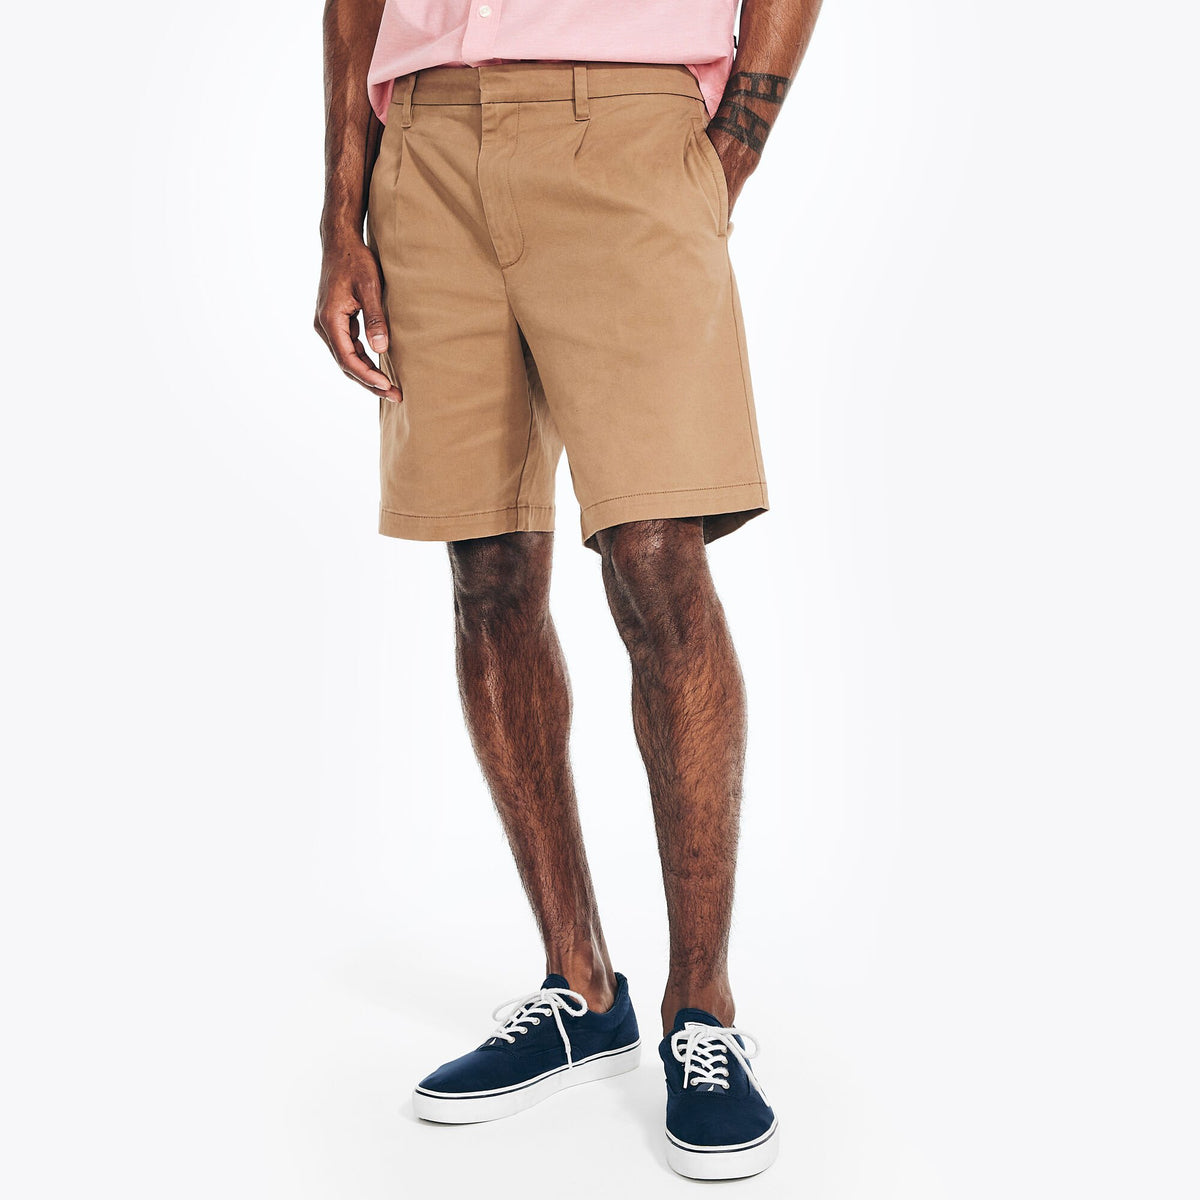 Nautica Men's 8.5" Pleated Short Oyster Brown